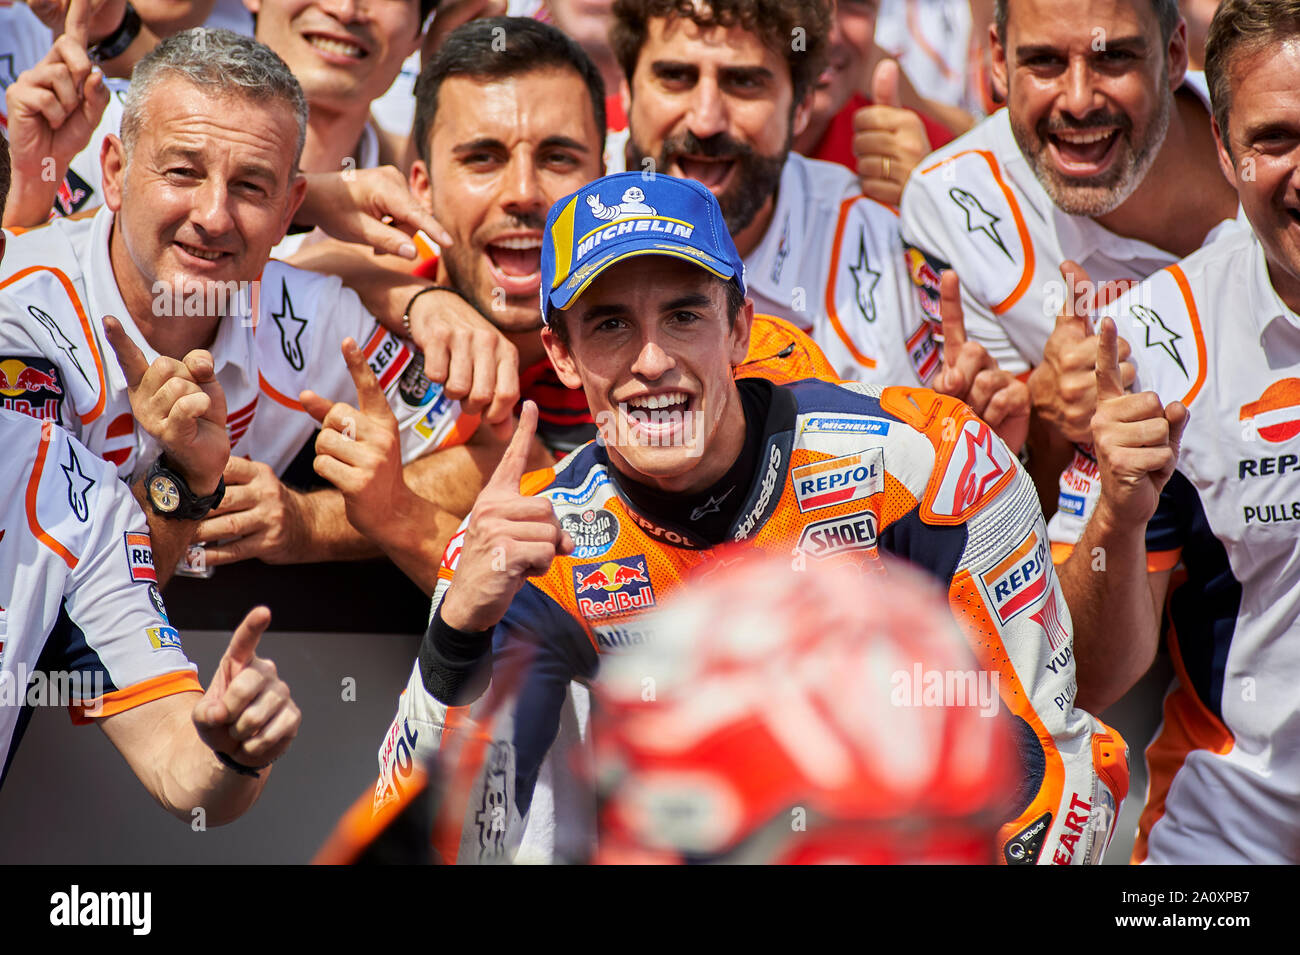 22nd September 2019; Ciudad del Motor de Aragon, Alcaniz, Spain; Aragon Motorcycle Grand Prix, Race Day; Marc Marquez and his team celebrate his victory at the end of the MotoGP race on the Motorland Circuit Stock Photo